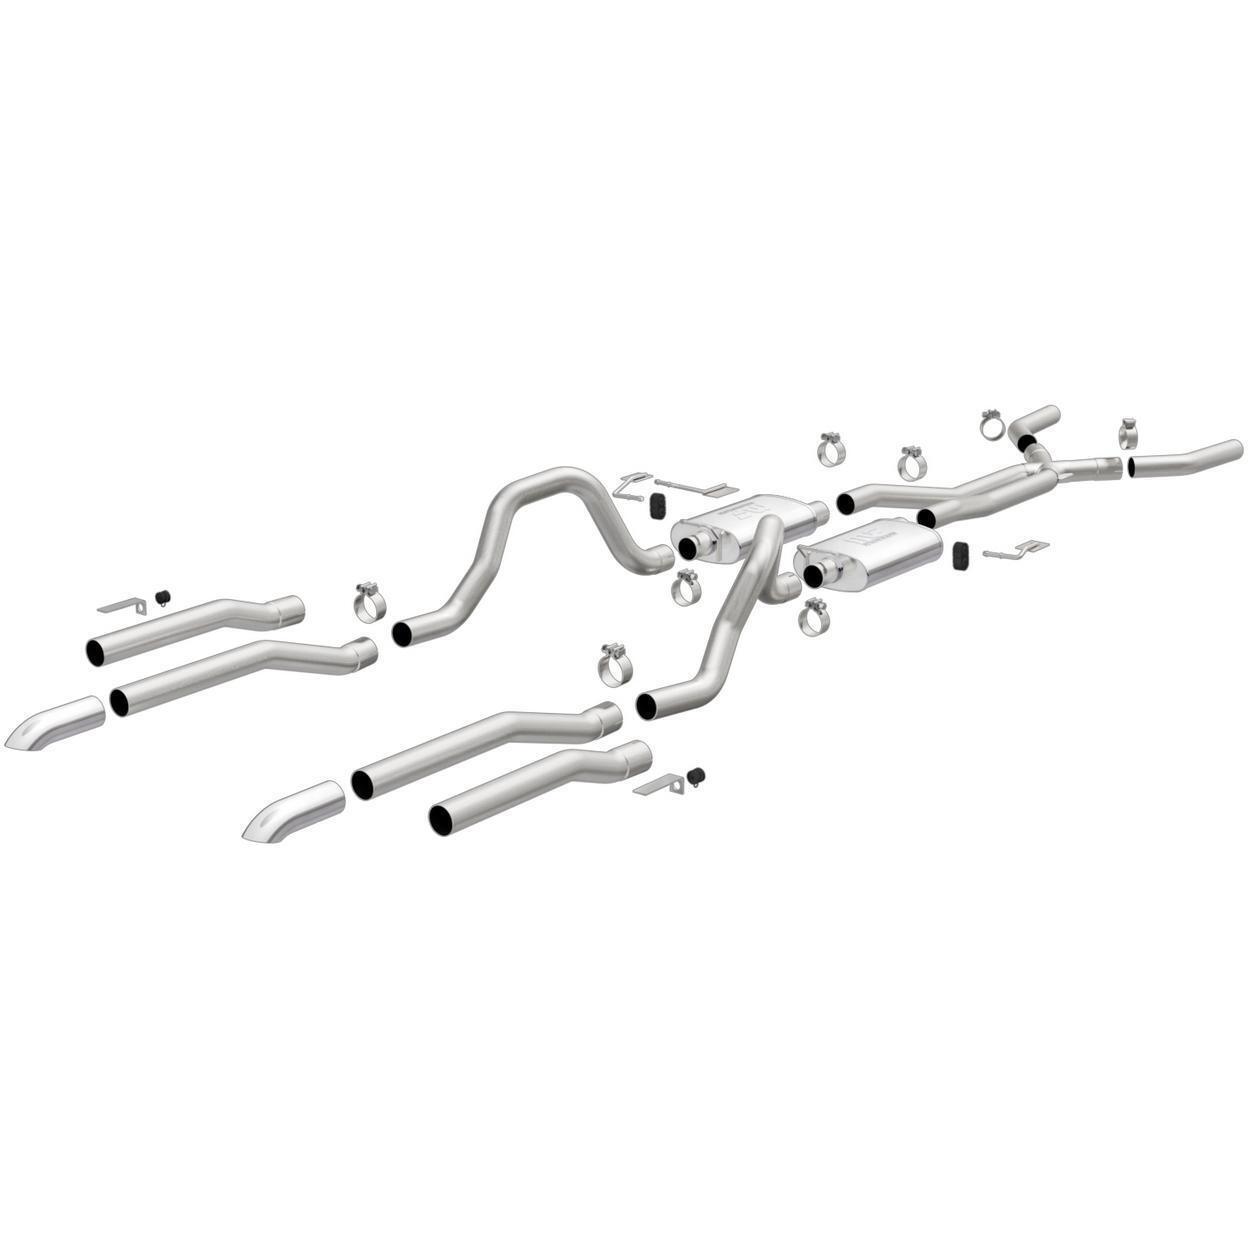 Exhaust System Kit for 1973-1974 Plymouth Satellite